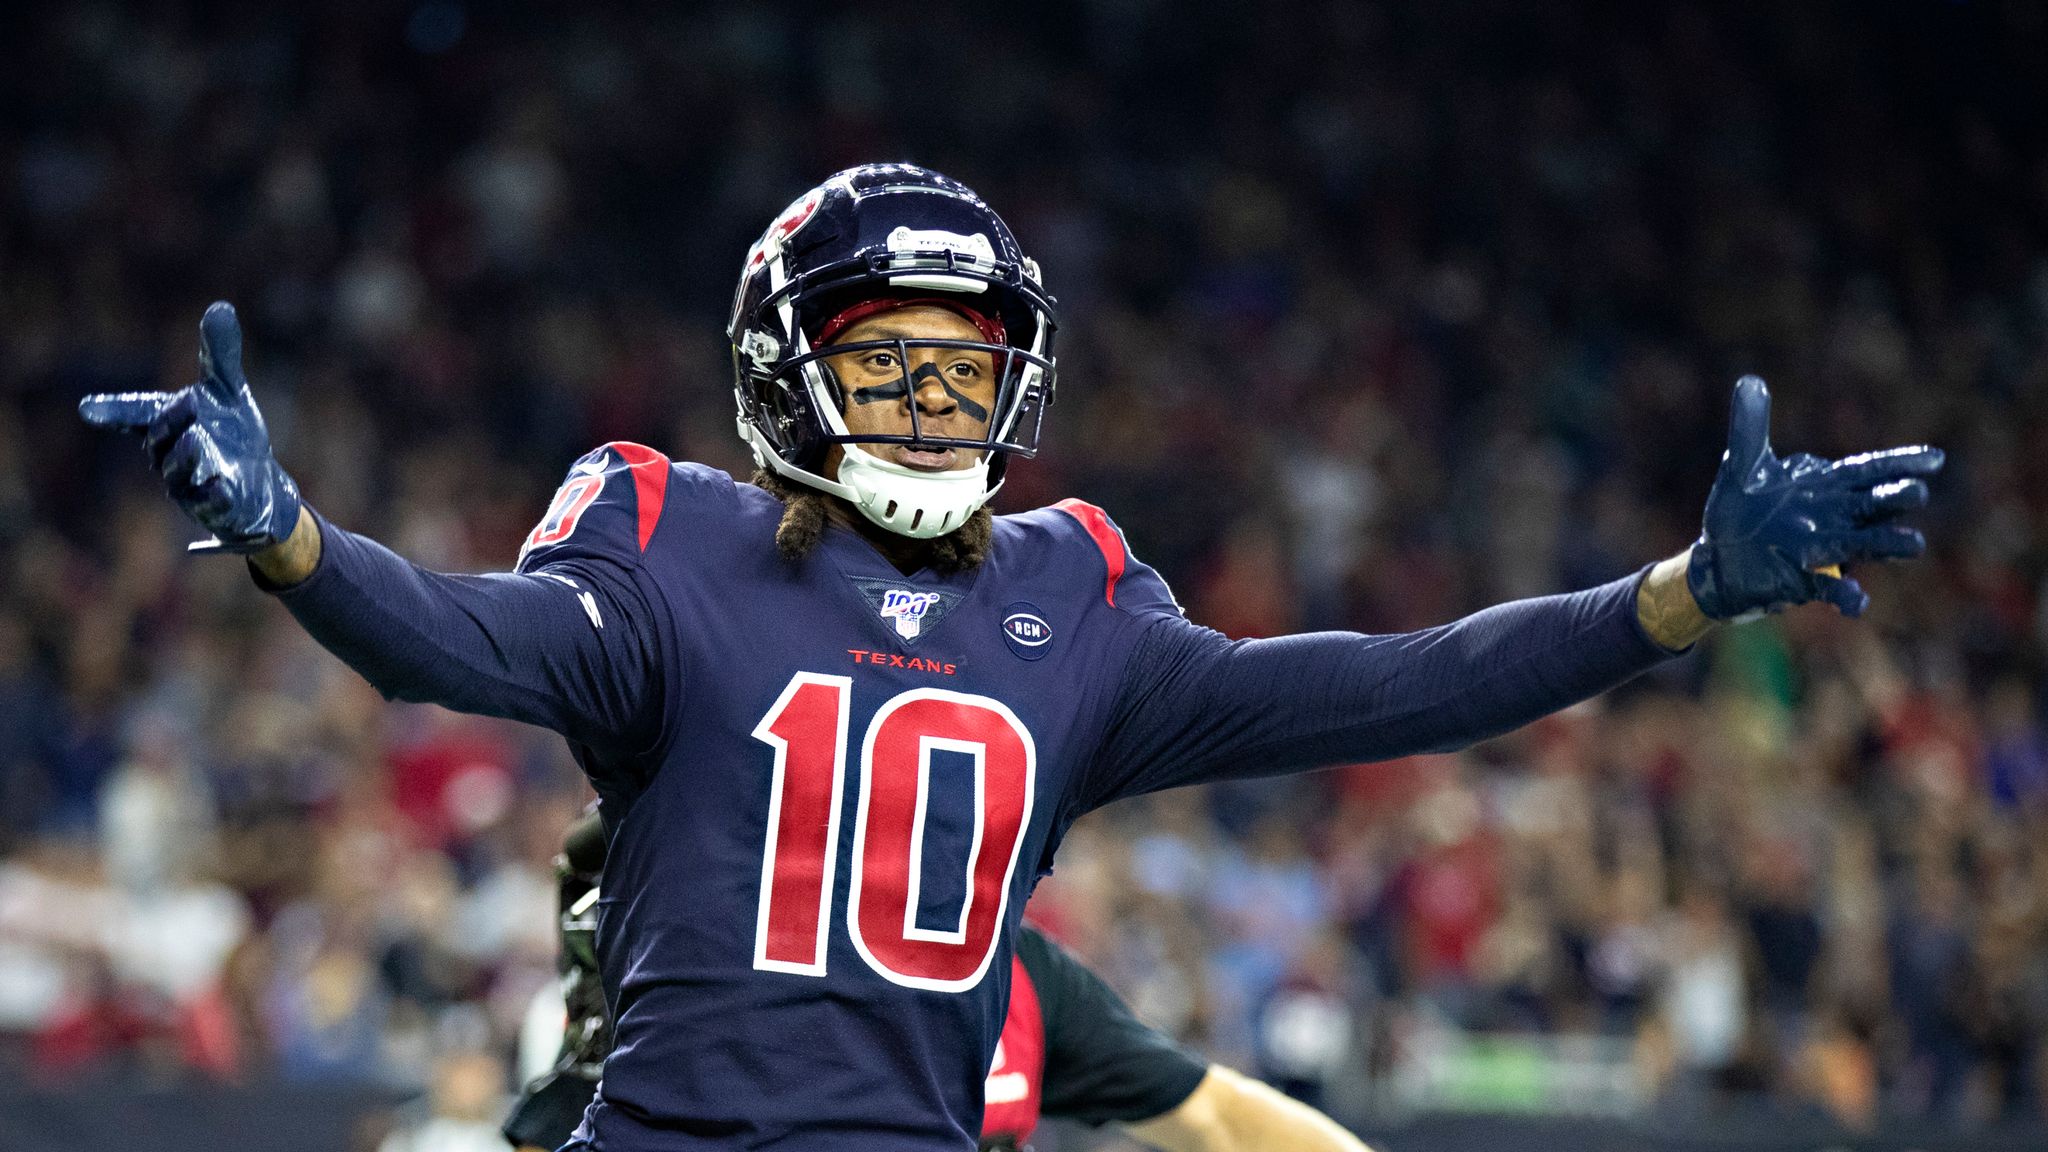 LOOK: Houston Texans Reveal Week 2 Uniforms vs. Indianapolis Colts - Sports  Illustrated Houston Texans News, Analysis and More